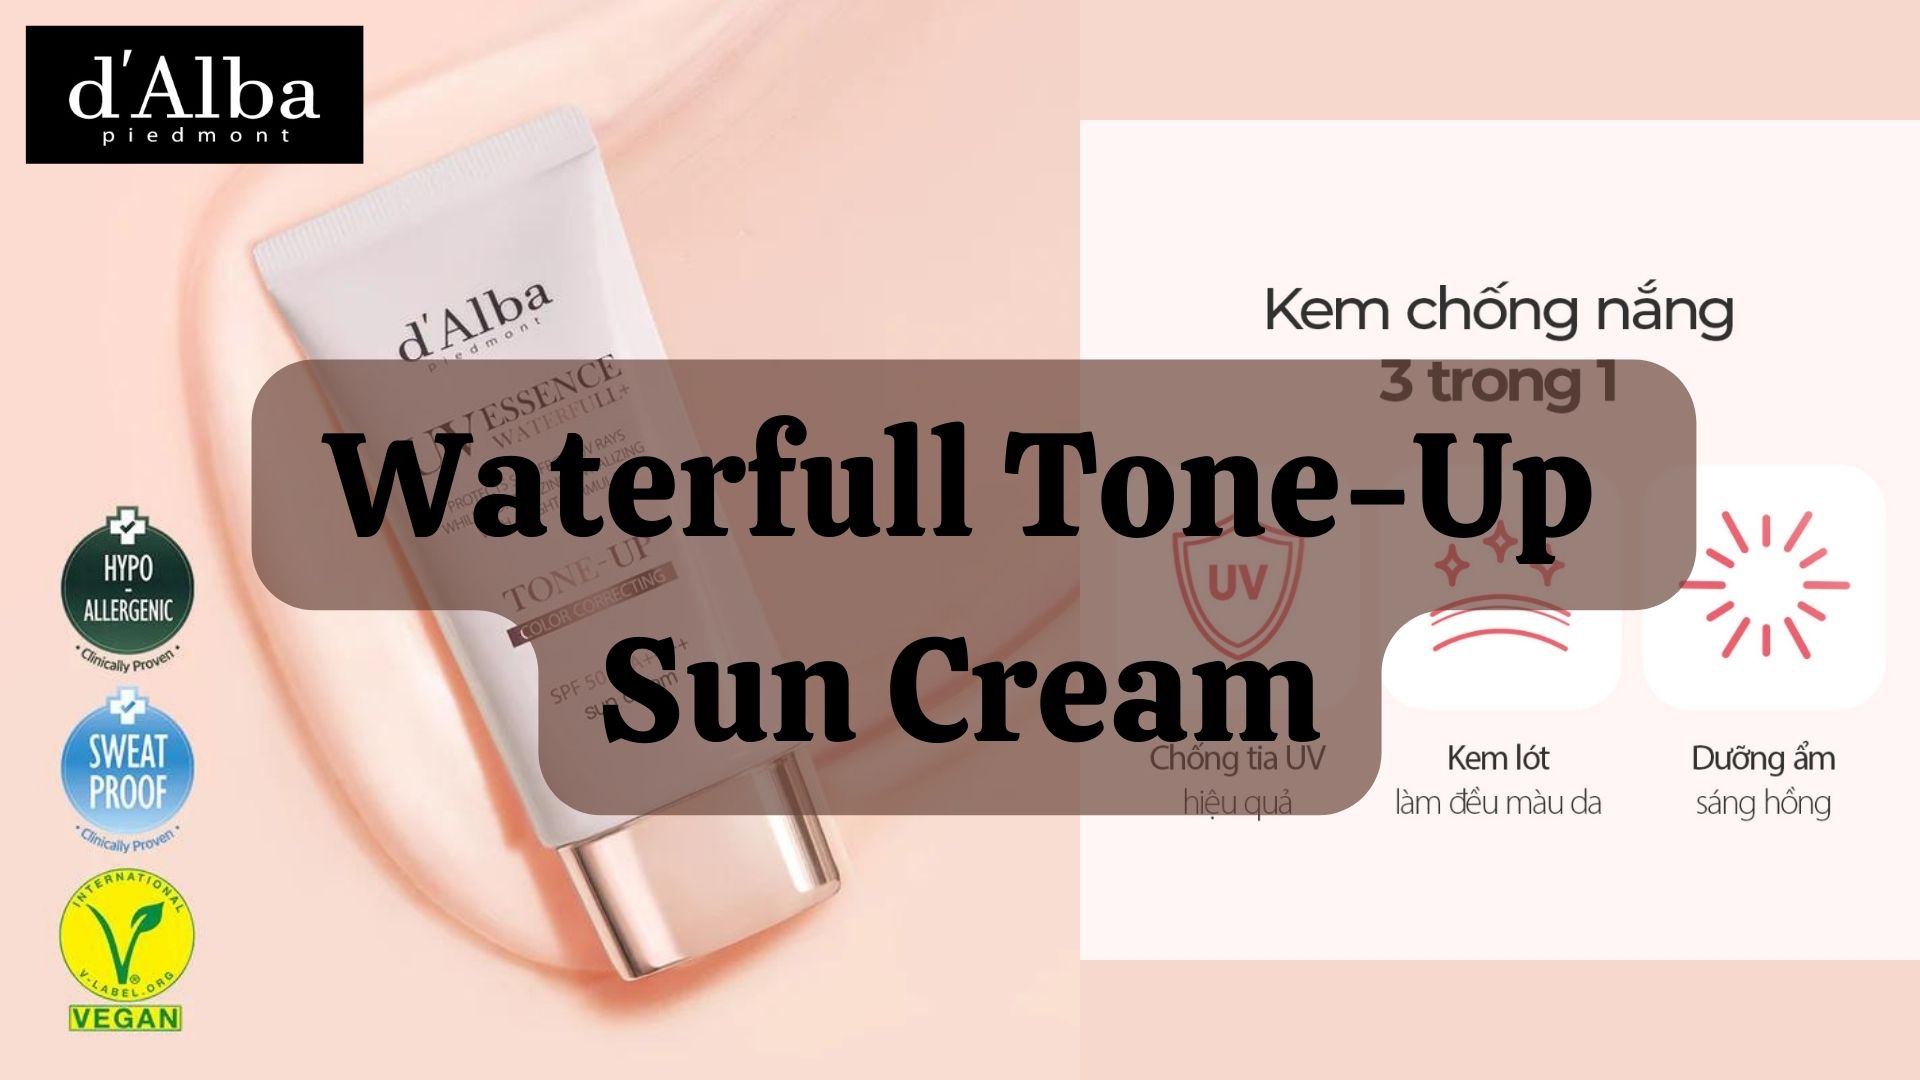 [Review] Kem Chống Nắng d'Alba Waterfull Tone-Up Sun Cream SPF50+PA++++ 11